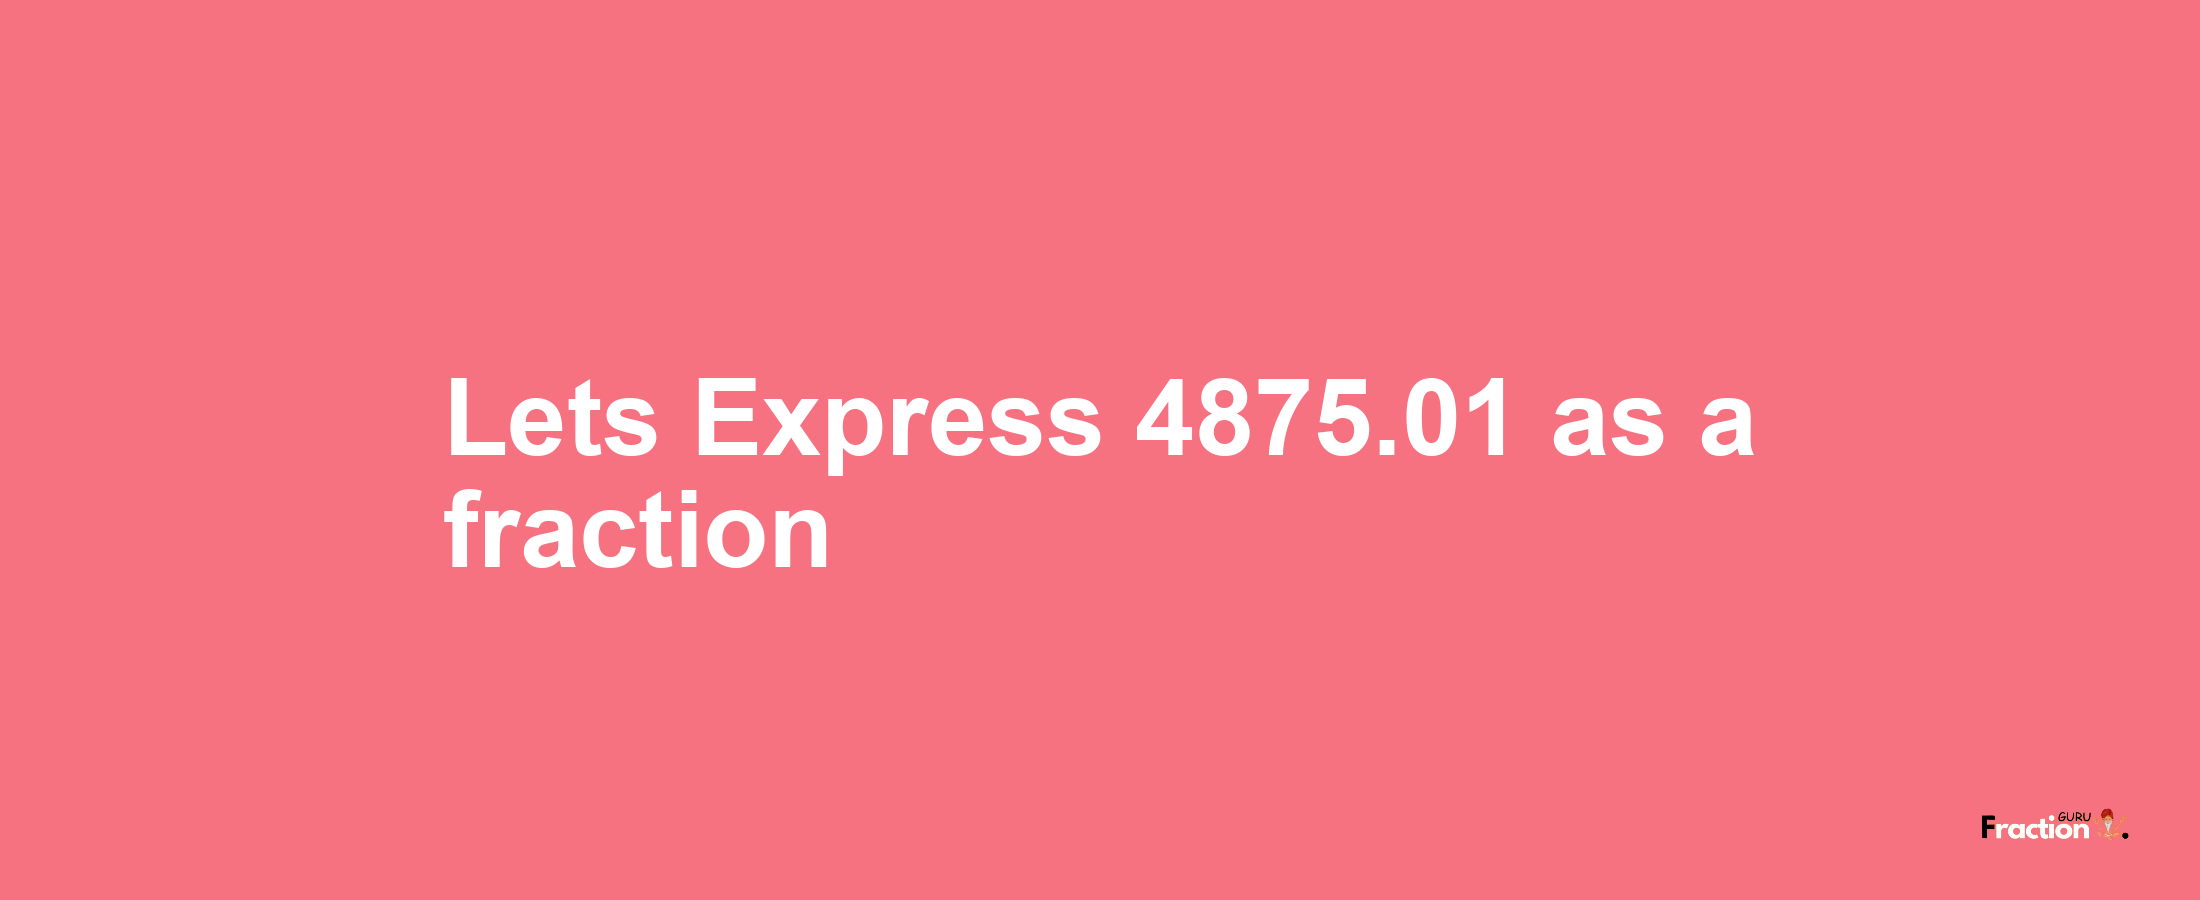 Lets Express 4875.01 as afraction